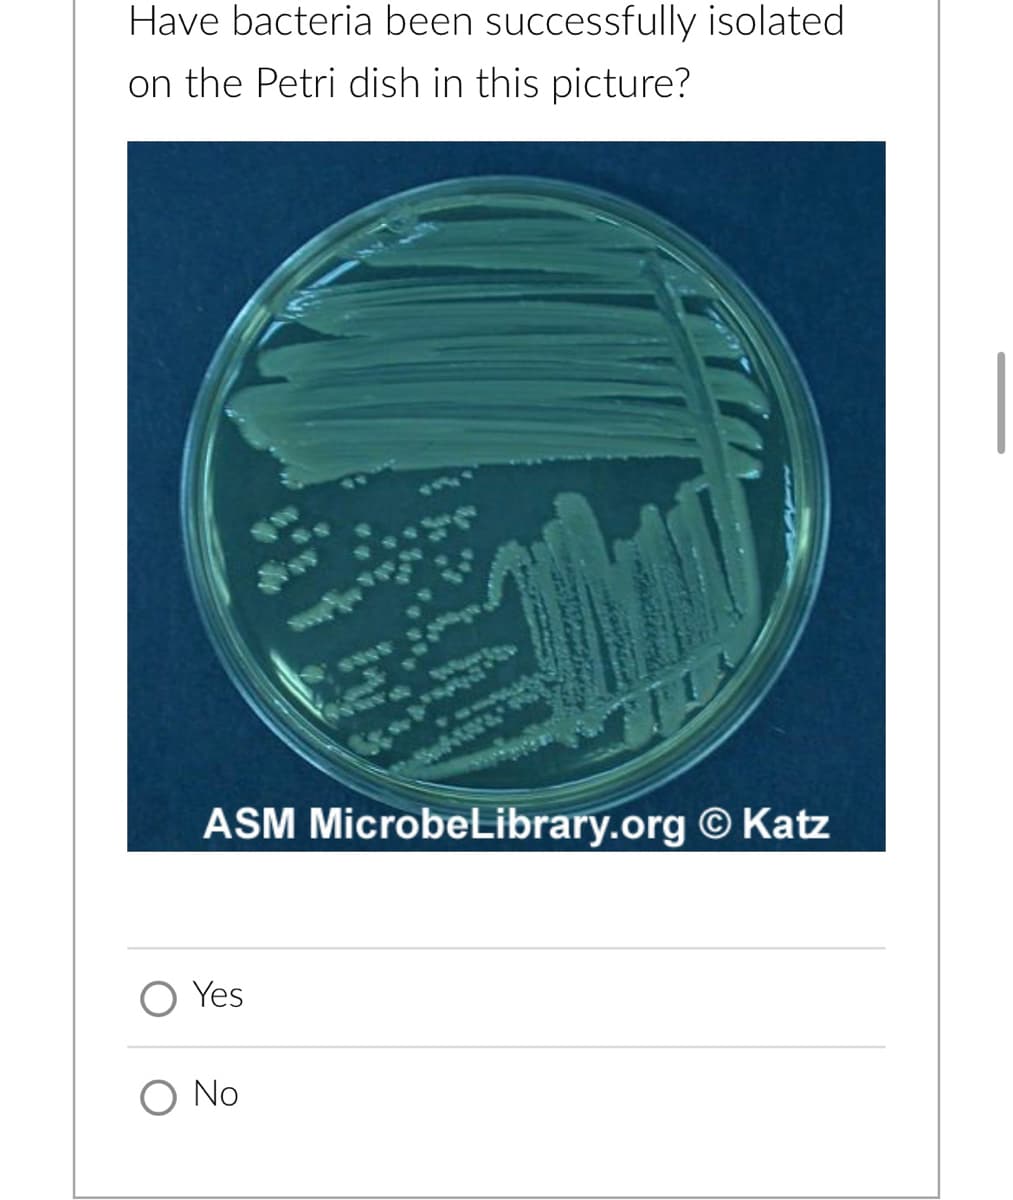 Have bacteria been successfully isolated
on the Petri dish in this picture?
ASM MicrobeLibrary.org © Katz
Yes
O No